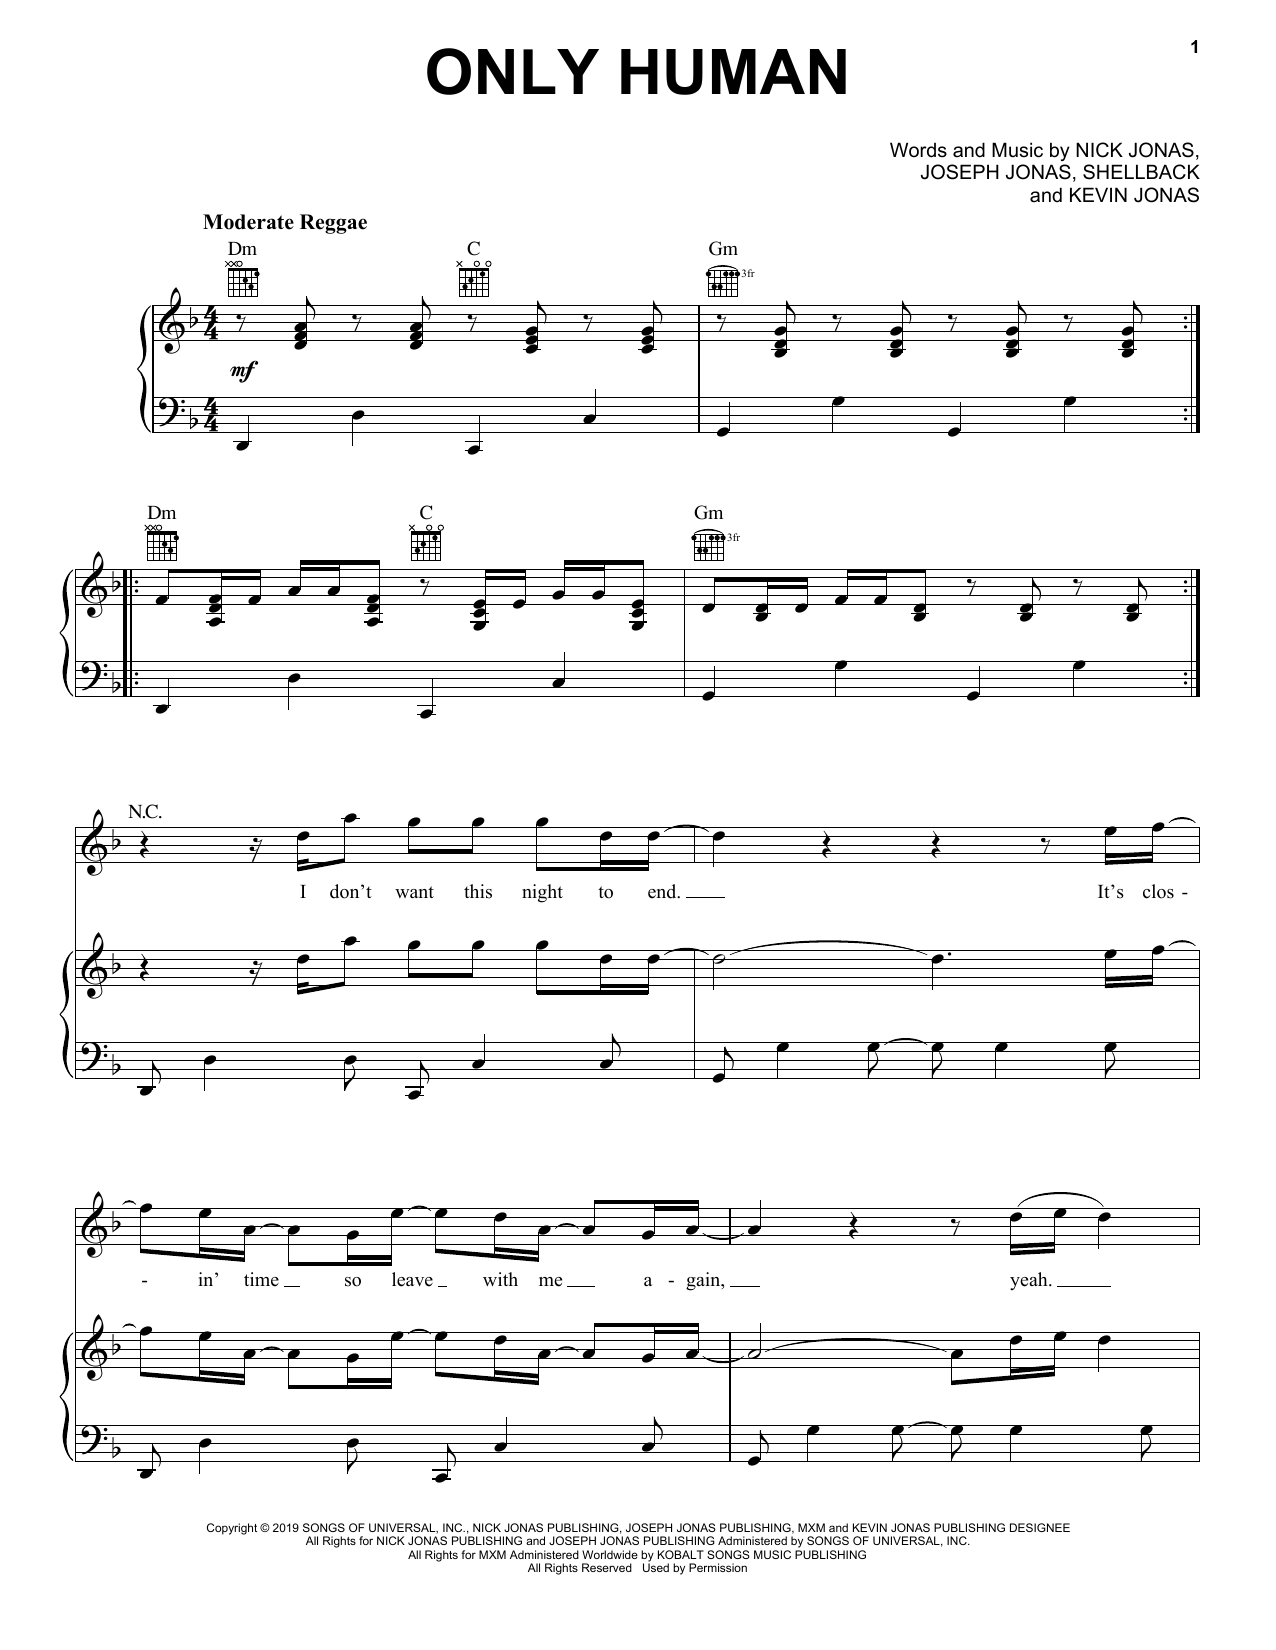 Download Jonas Brothers Only Human Sheet Music